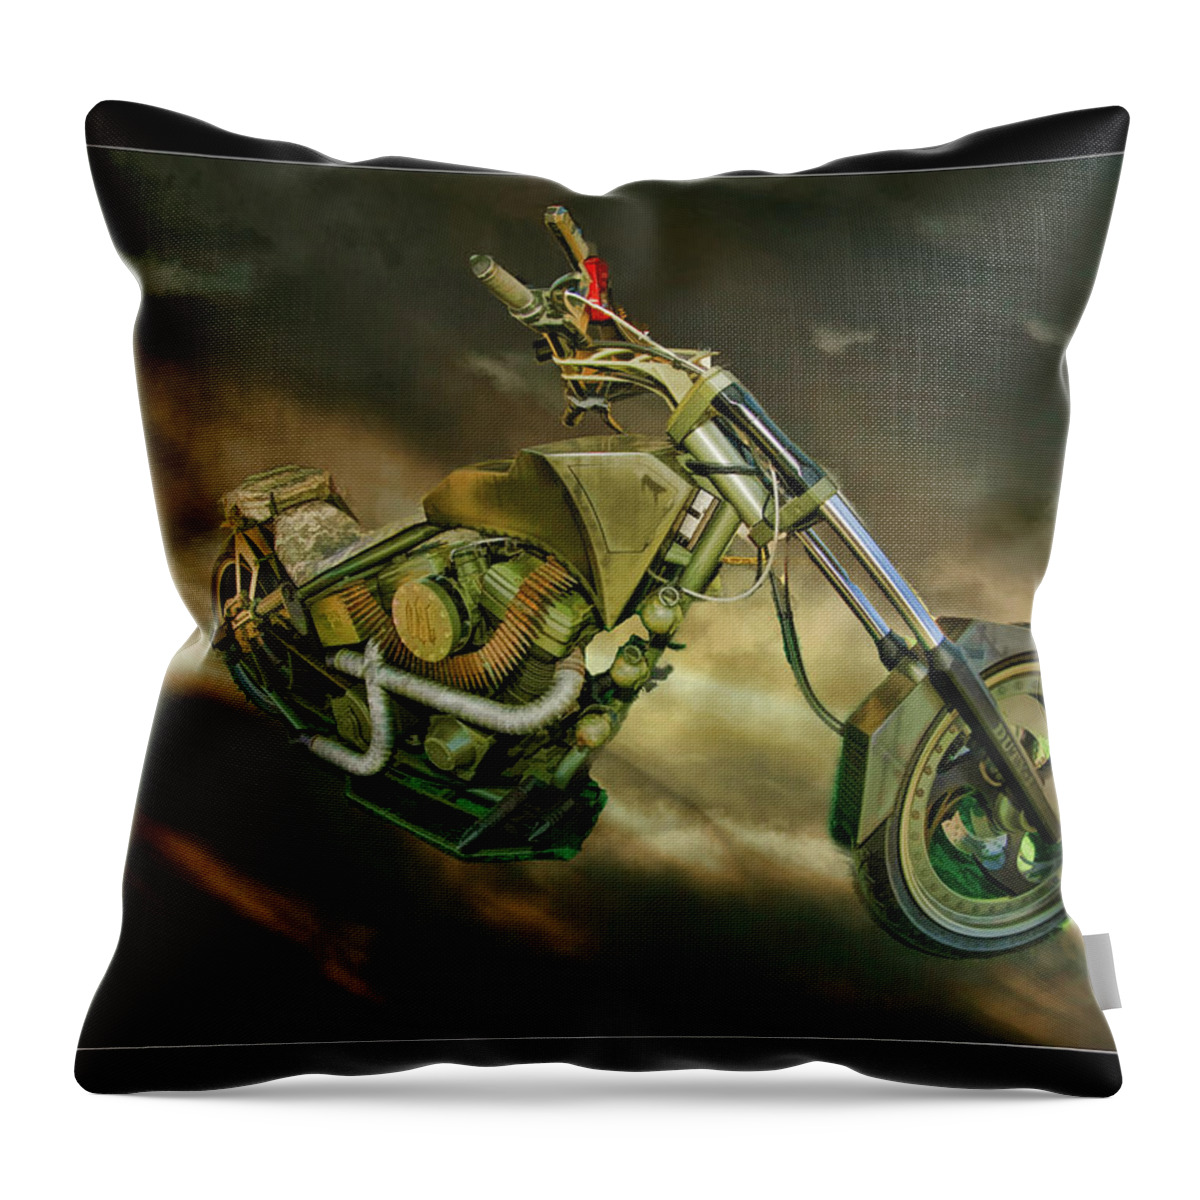 Military Motorcycle Throw Pillow featuring the photograph Military Motocycle by Blake Richards